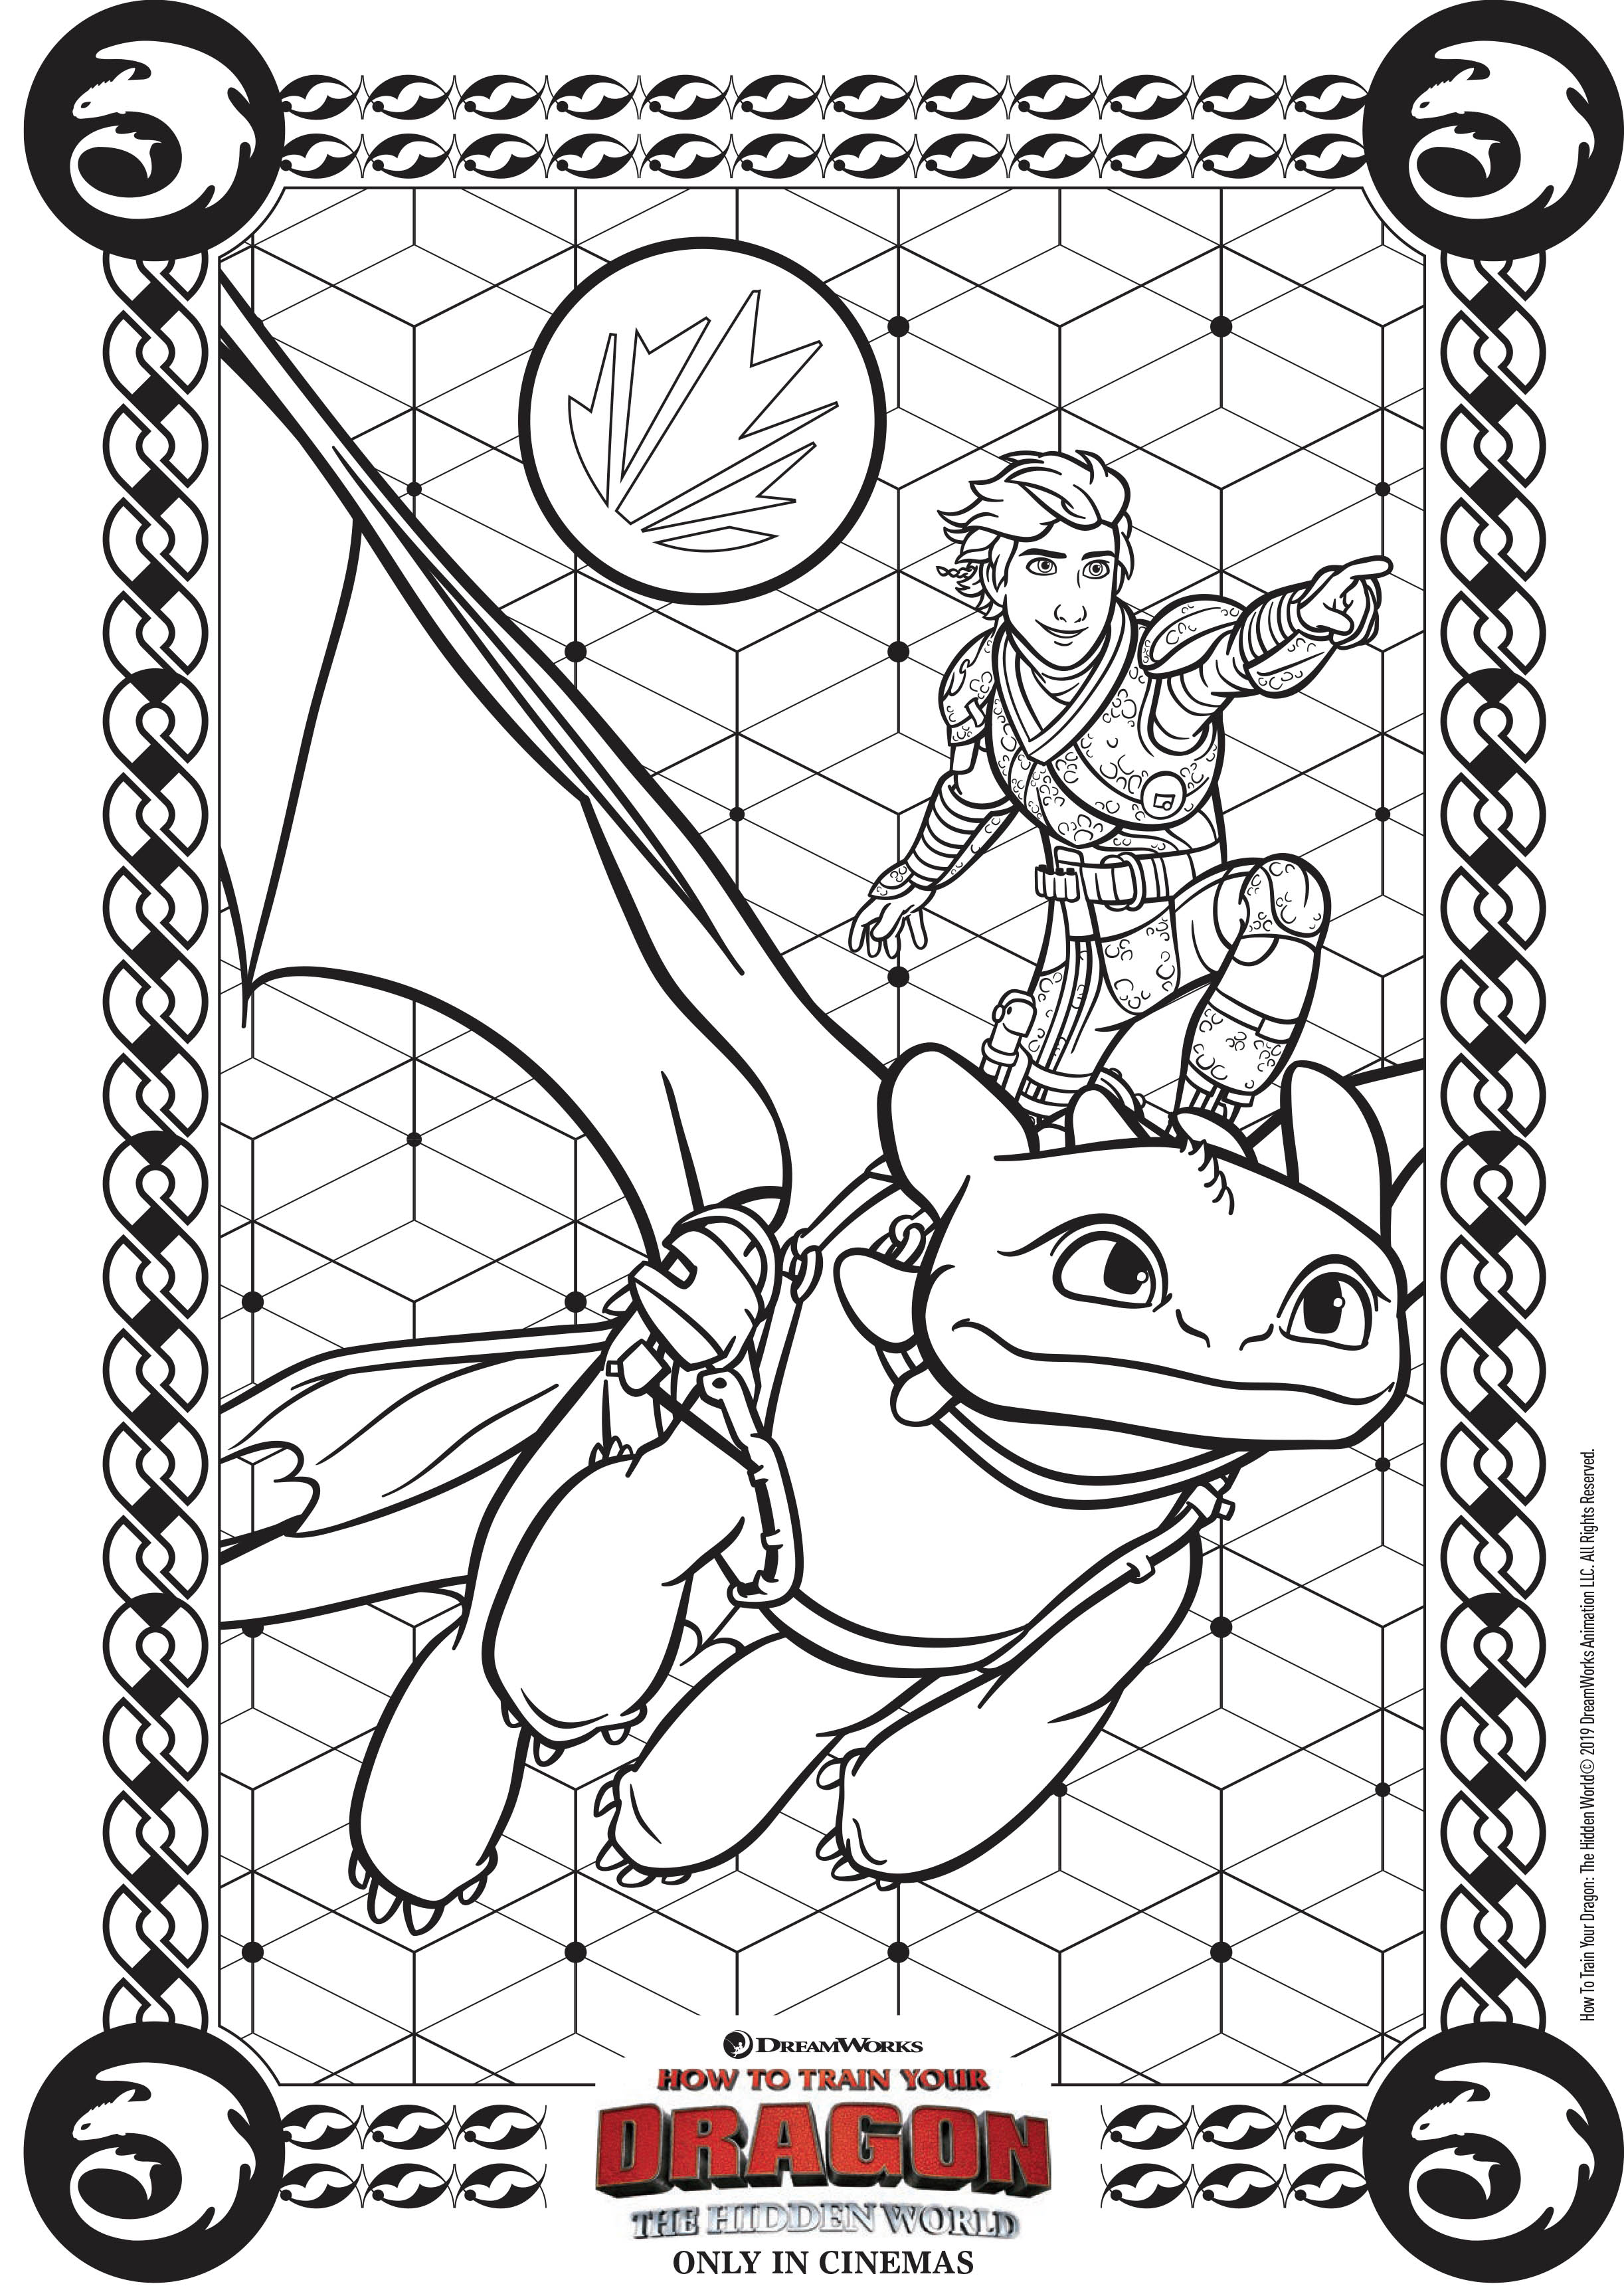 Color Toothless and Hiccup to help them fly even higher!